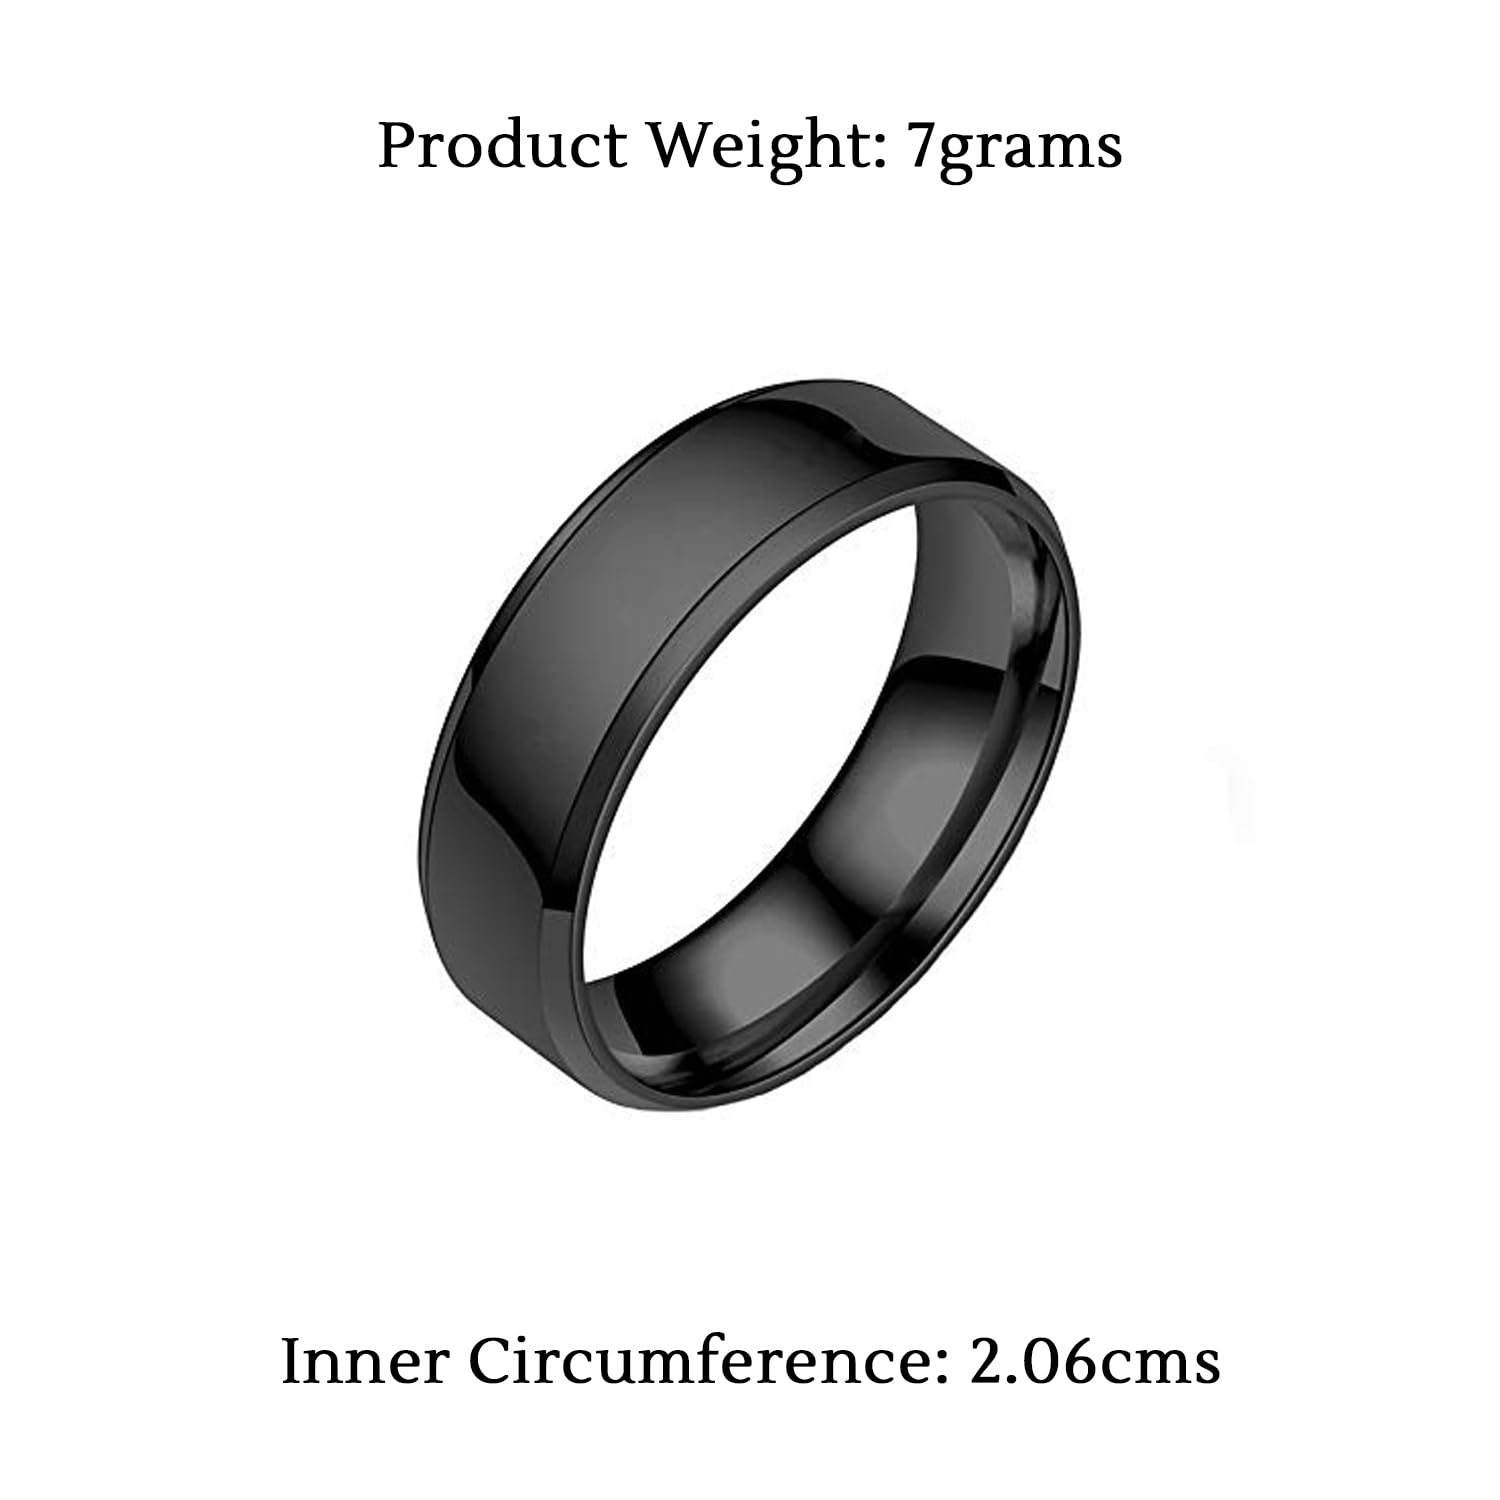 Diamond Embedded Silver Stainless Steel Ring | B14-MAY-29 | Cilory.com